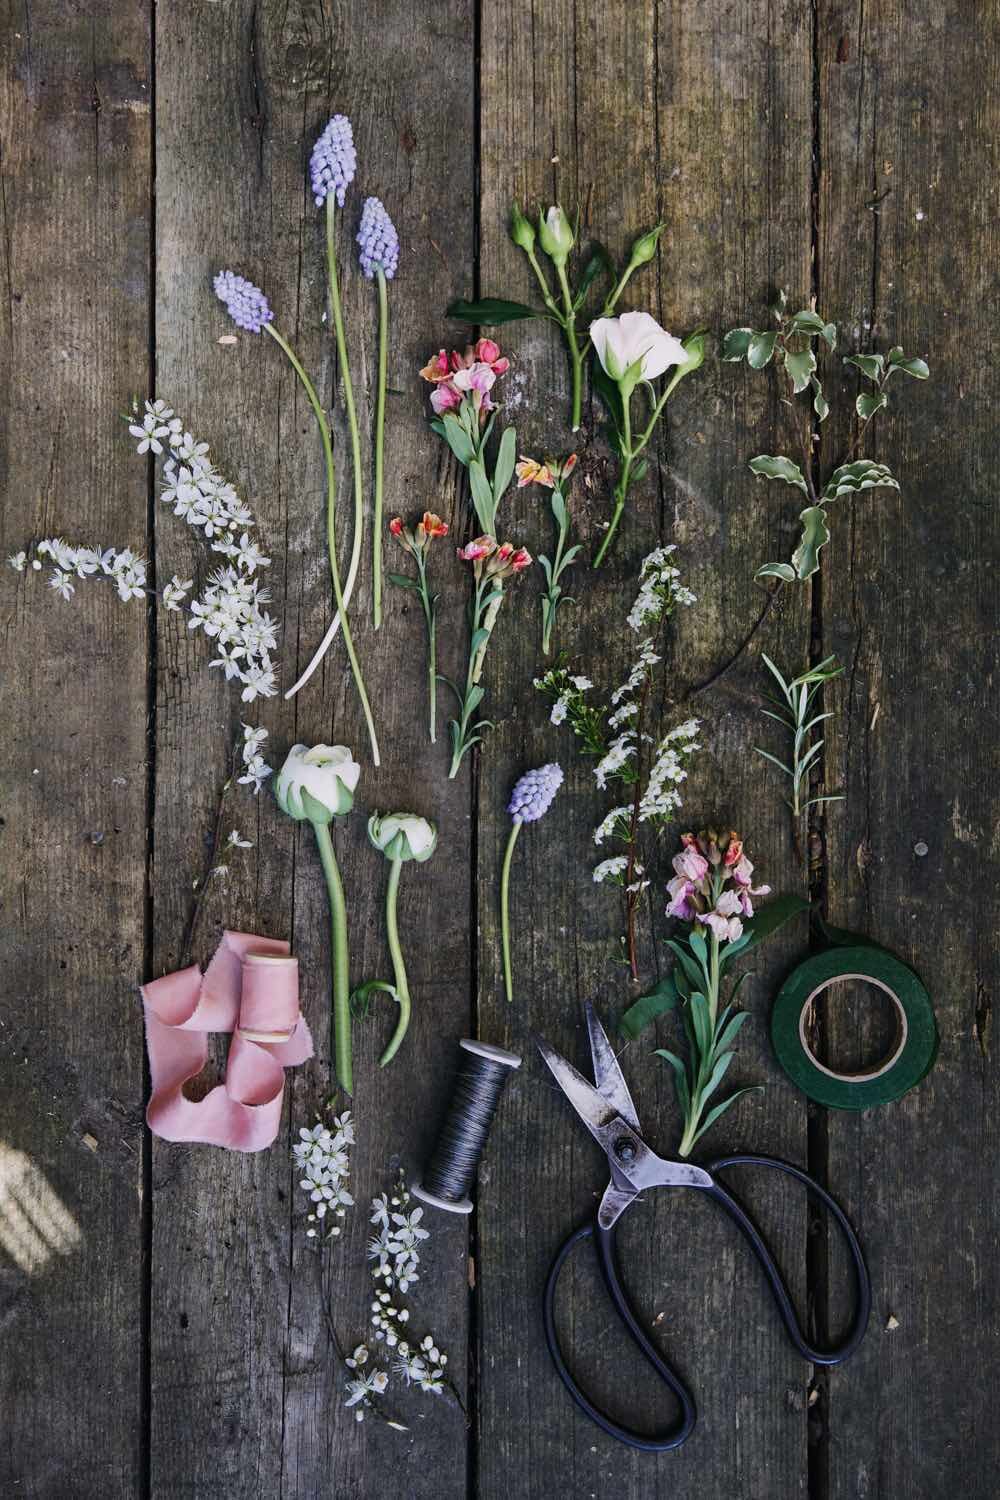 Flowers and tools 